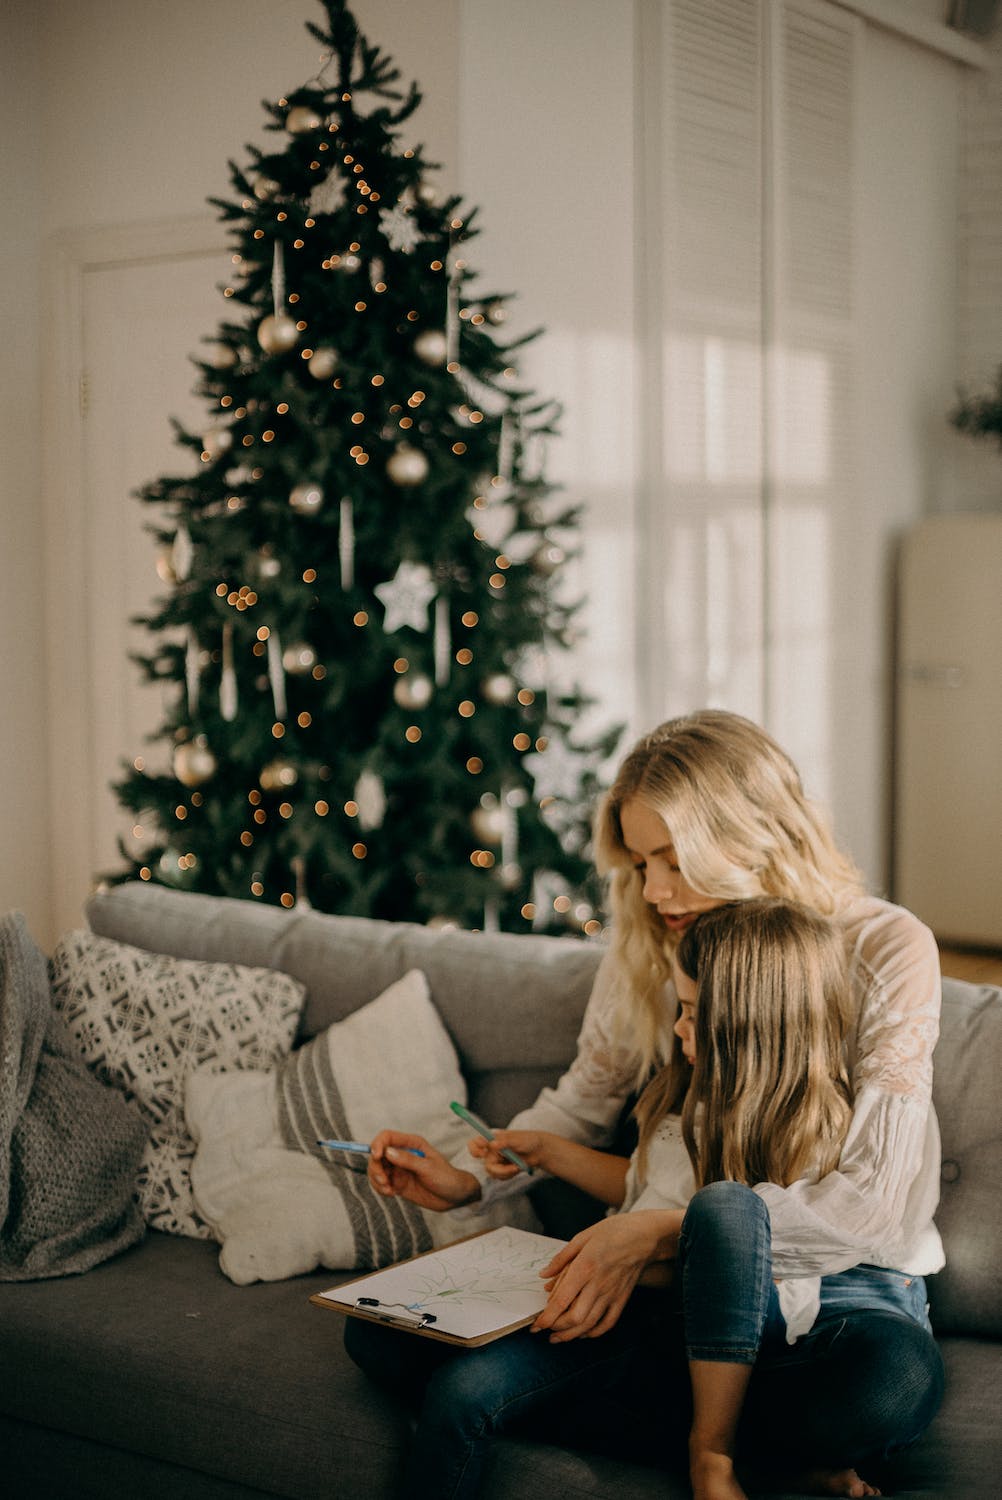 6 Signs Your Child Is Experiencing Anxiety During the Holidays